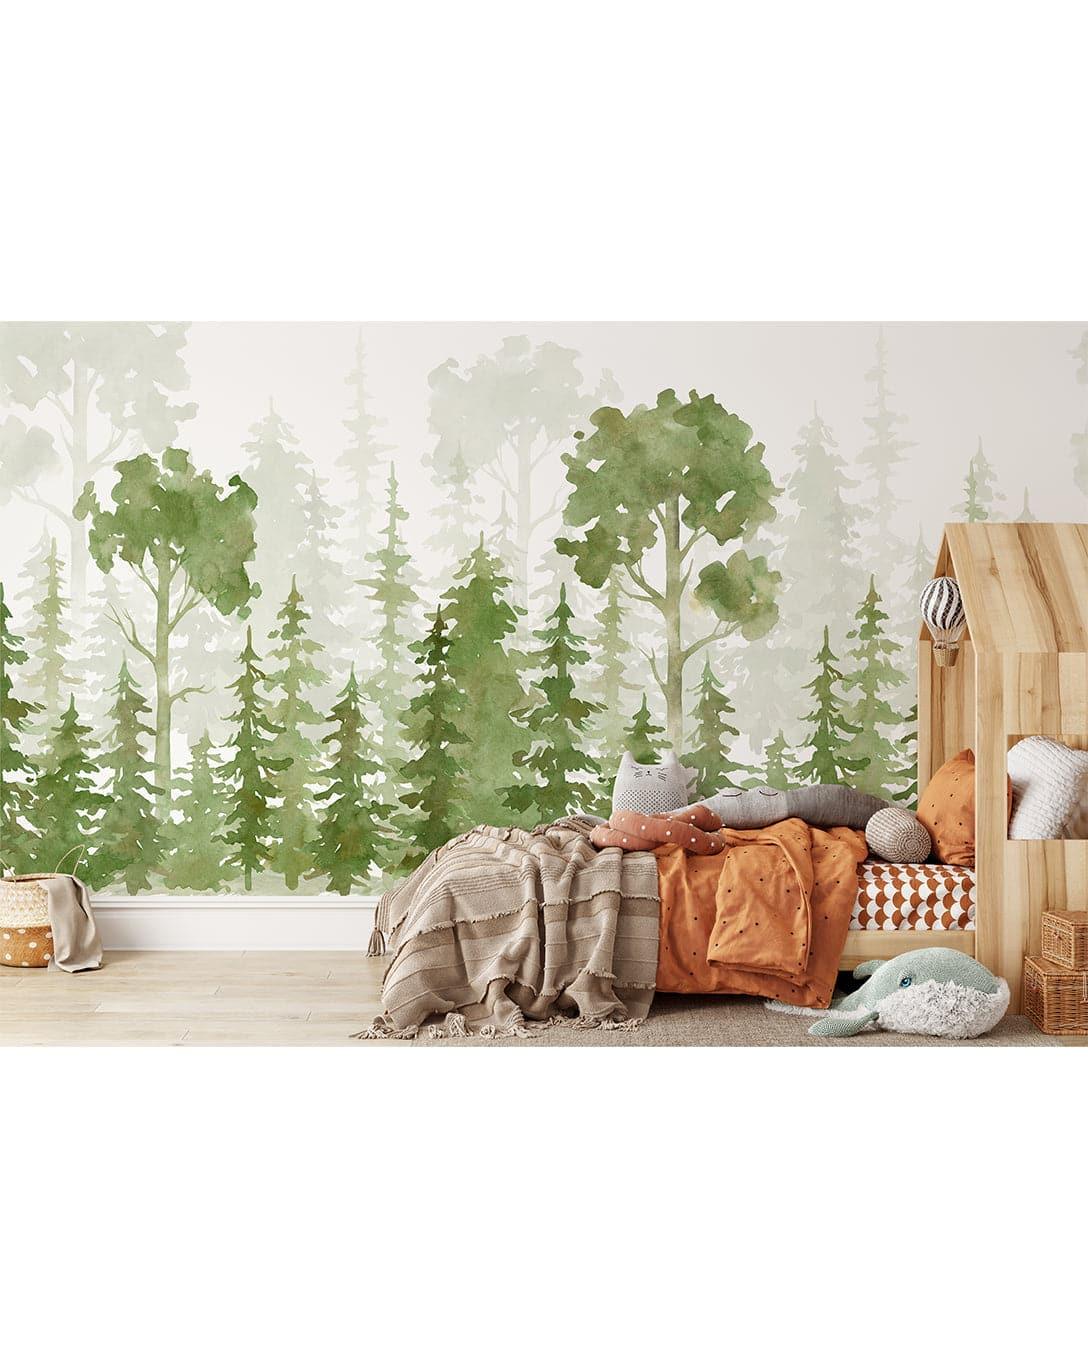 Watercolor Pine Tree Forest Wall Mural Watercolor Pine Tree Forest Wall Mural 